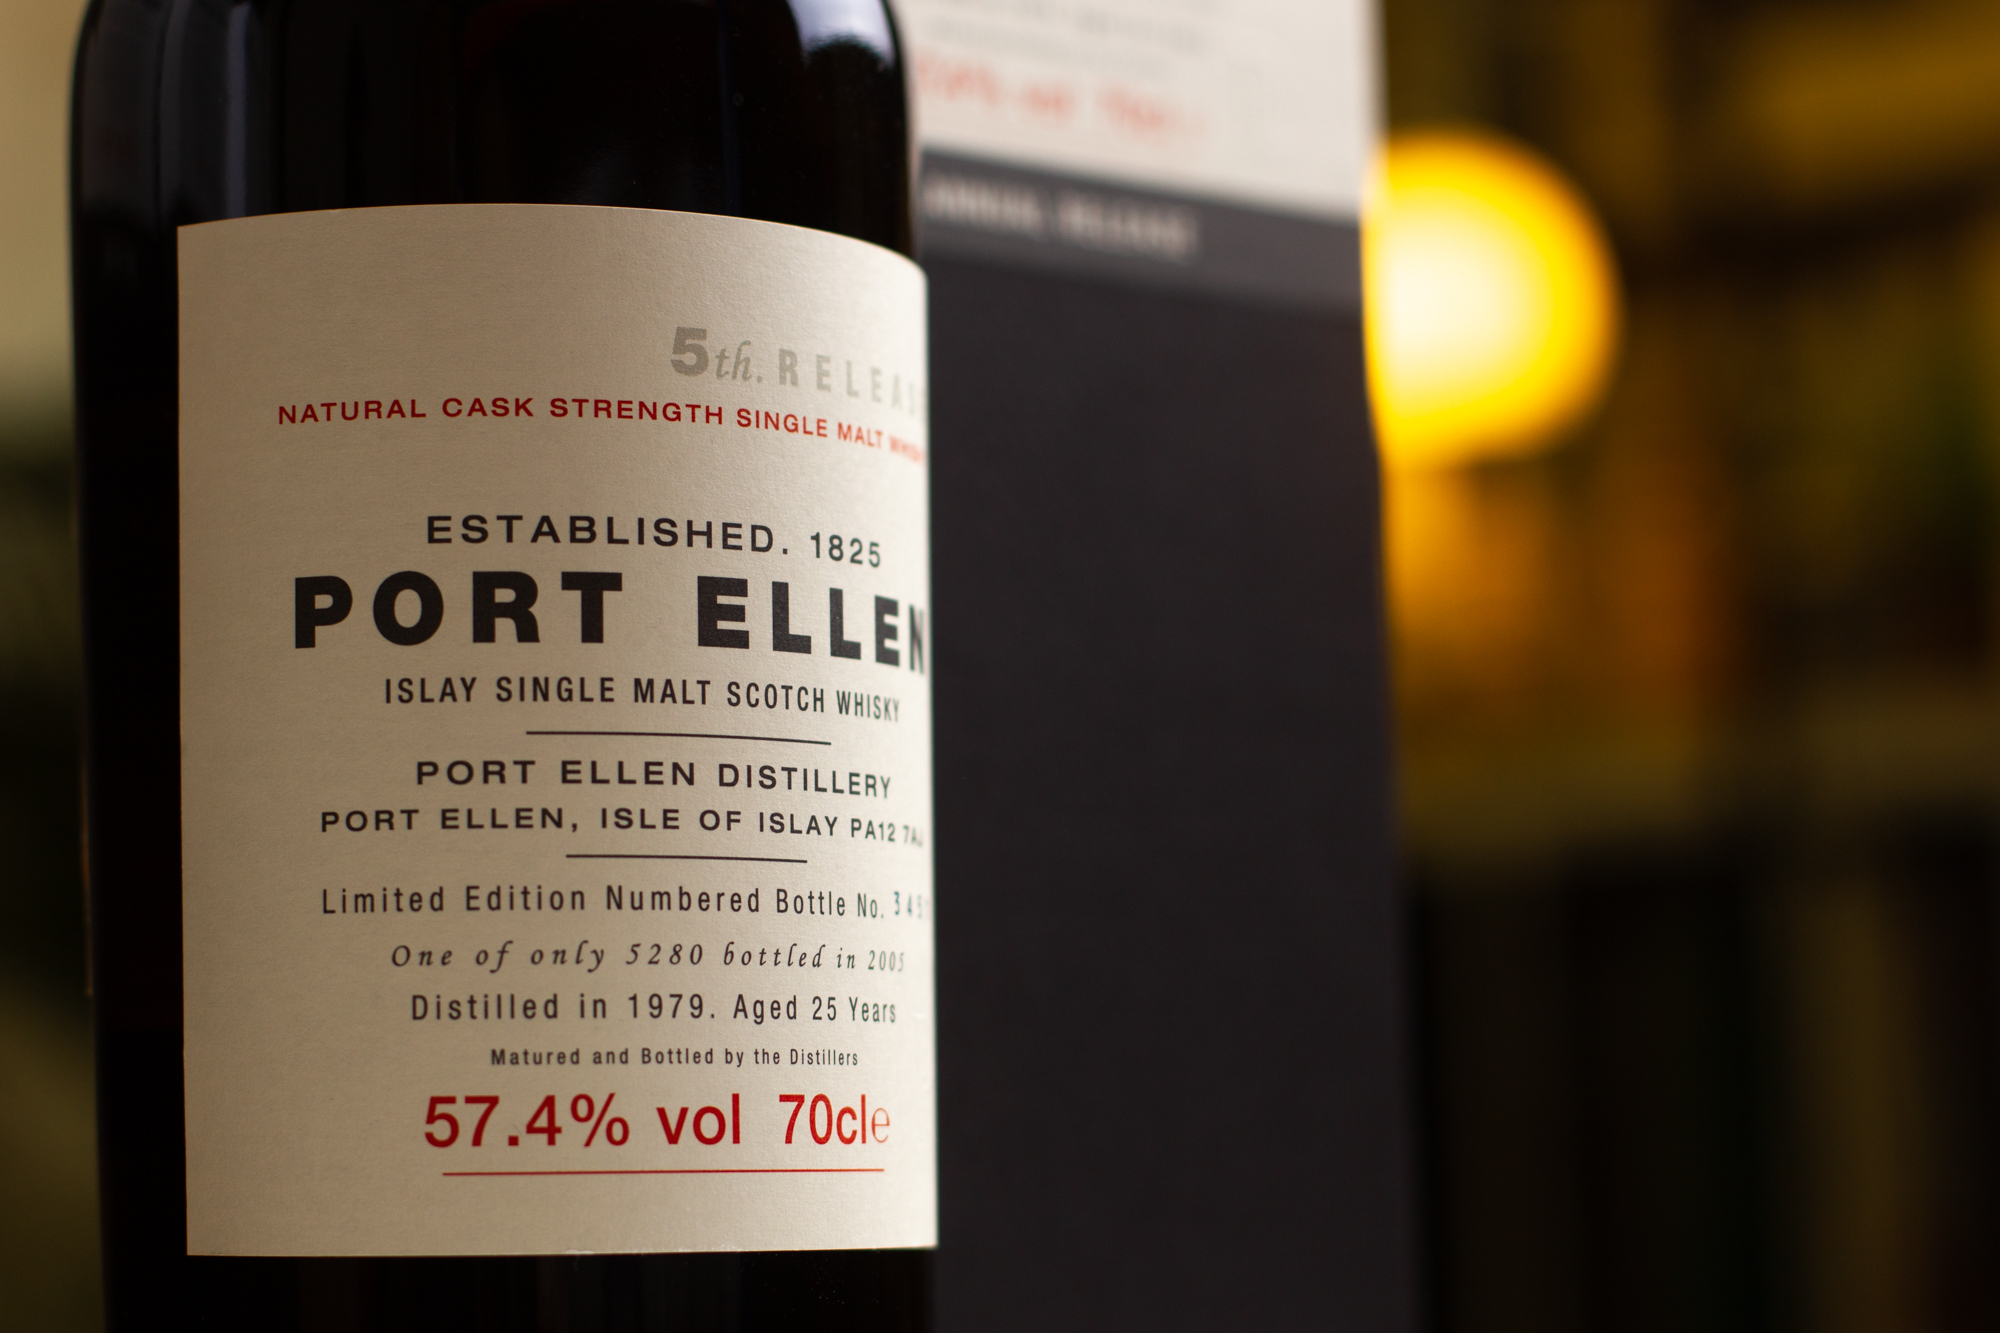 Vintage bottles from discontinued series, like the Port Ellen Annual Releases, can provide a solid medium to long investment.